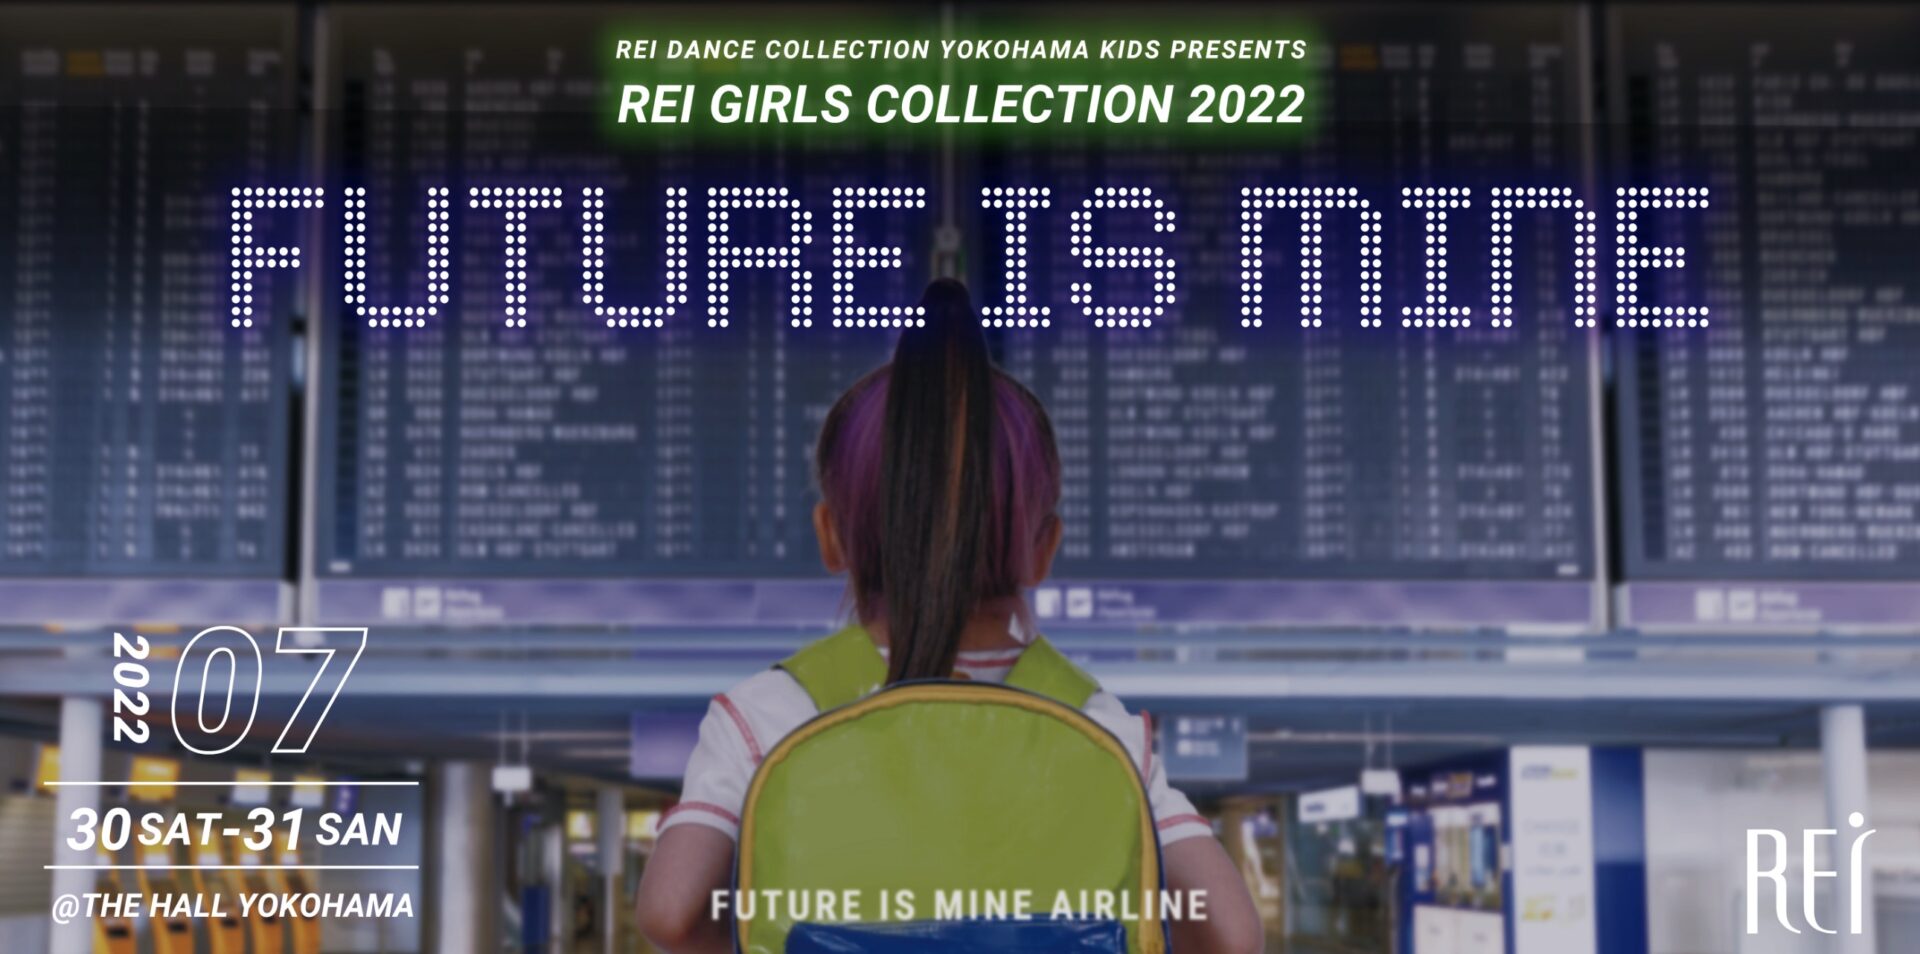 REI GIRLS COLLECTION 2022：FUTURE IS MINE